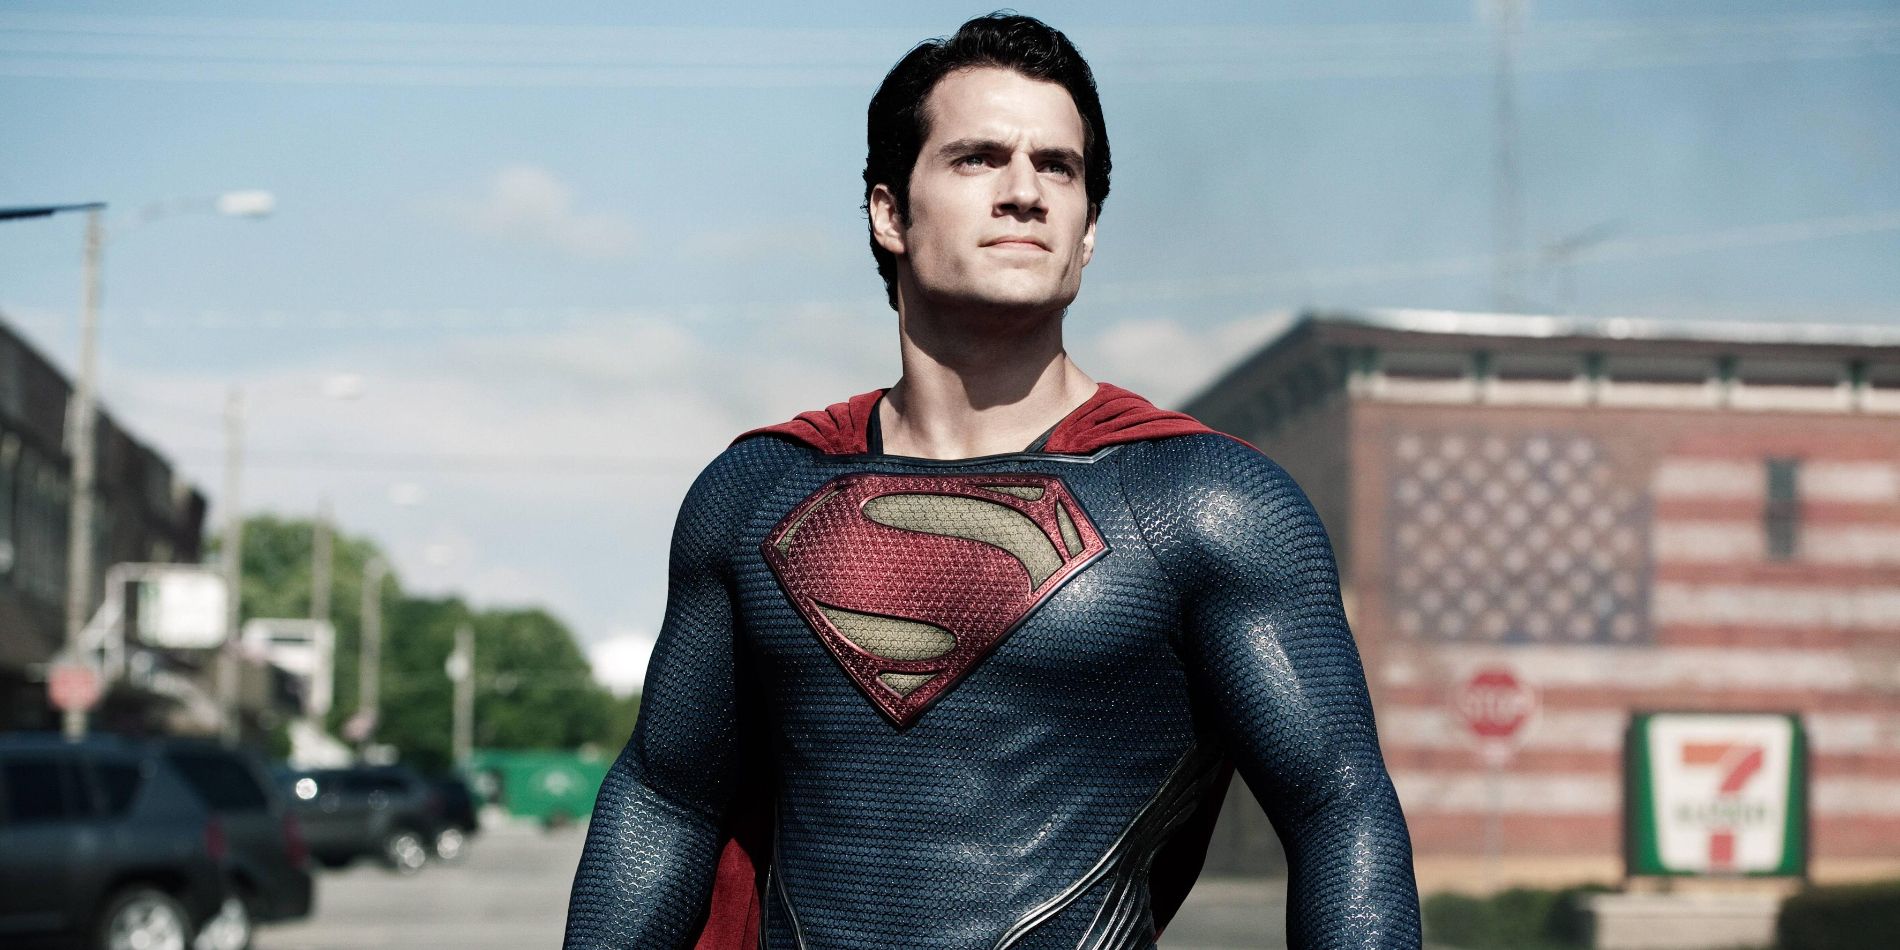 Henry Cavill as Superman stands on a Smallville street